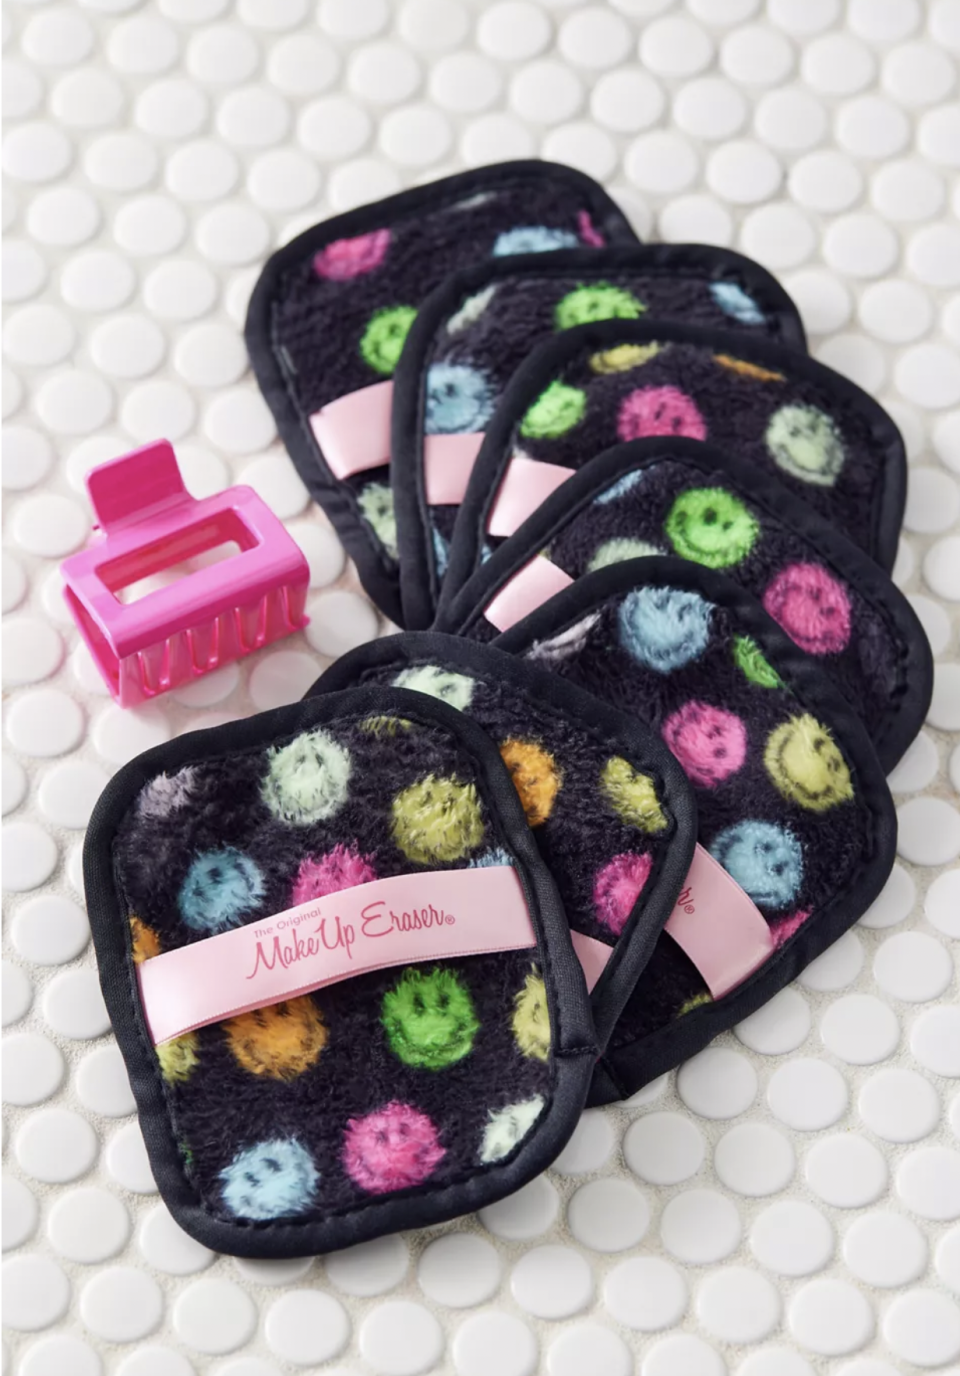 <p><strong>The Original MakeUp Eraser</strong></p><p>urbanoutfitters.com</p><p><strong>$25.00</strong></p><p>Make makeup removal easy with these reusable cloths. All she needs is water to take off her glam from the day. Then turn the cloth over to exfoliate! This set includes seven mini MakeUp Erasers for each day of the week plus a cute zip pouch.</p>